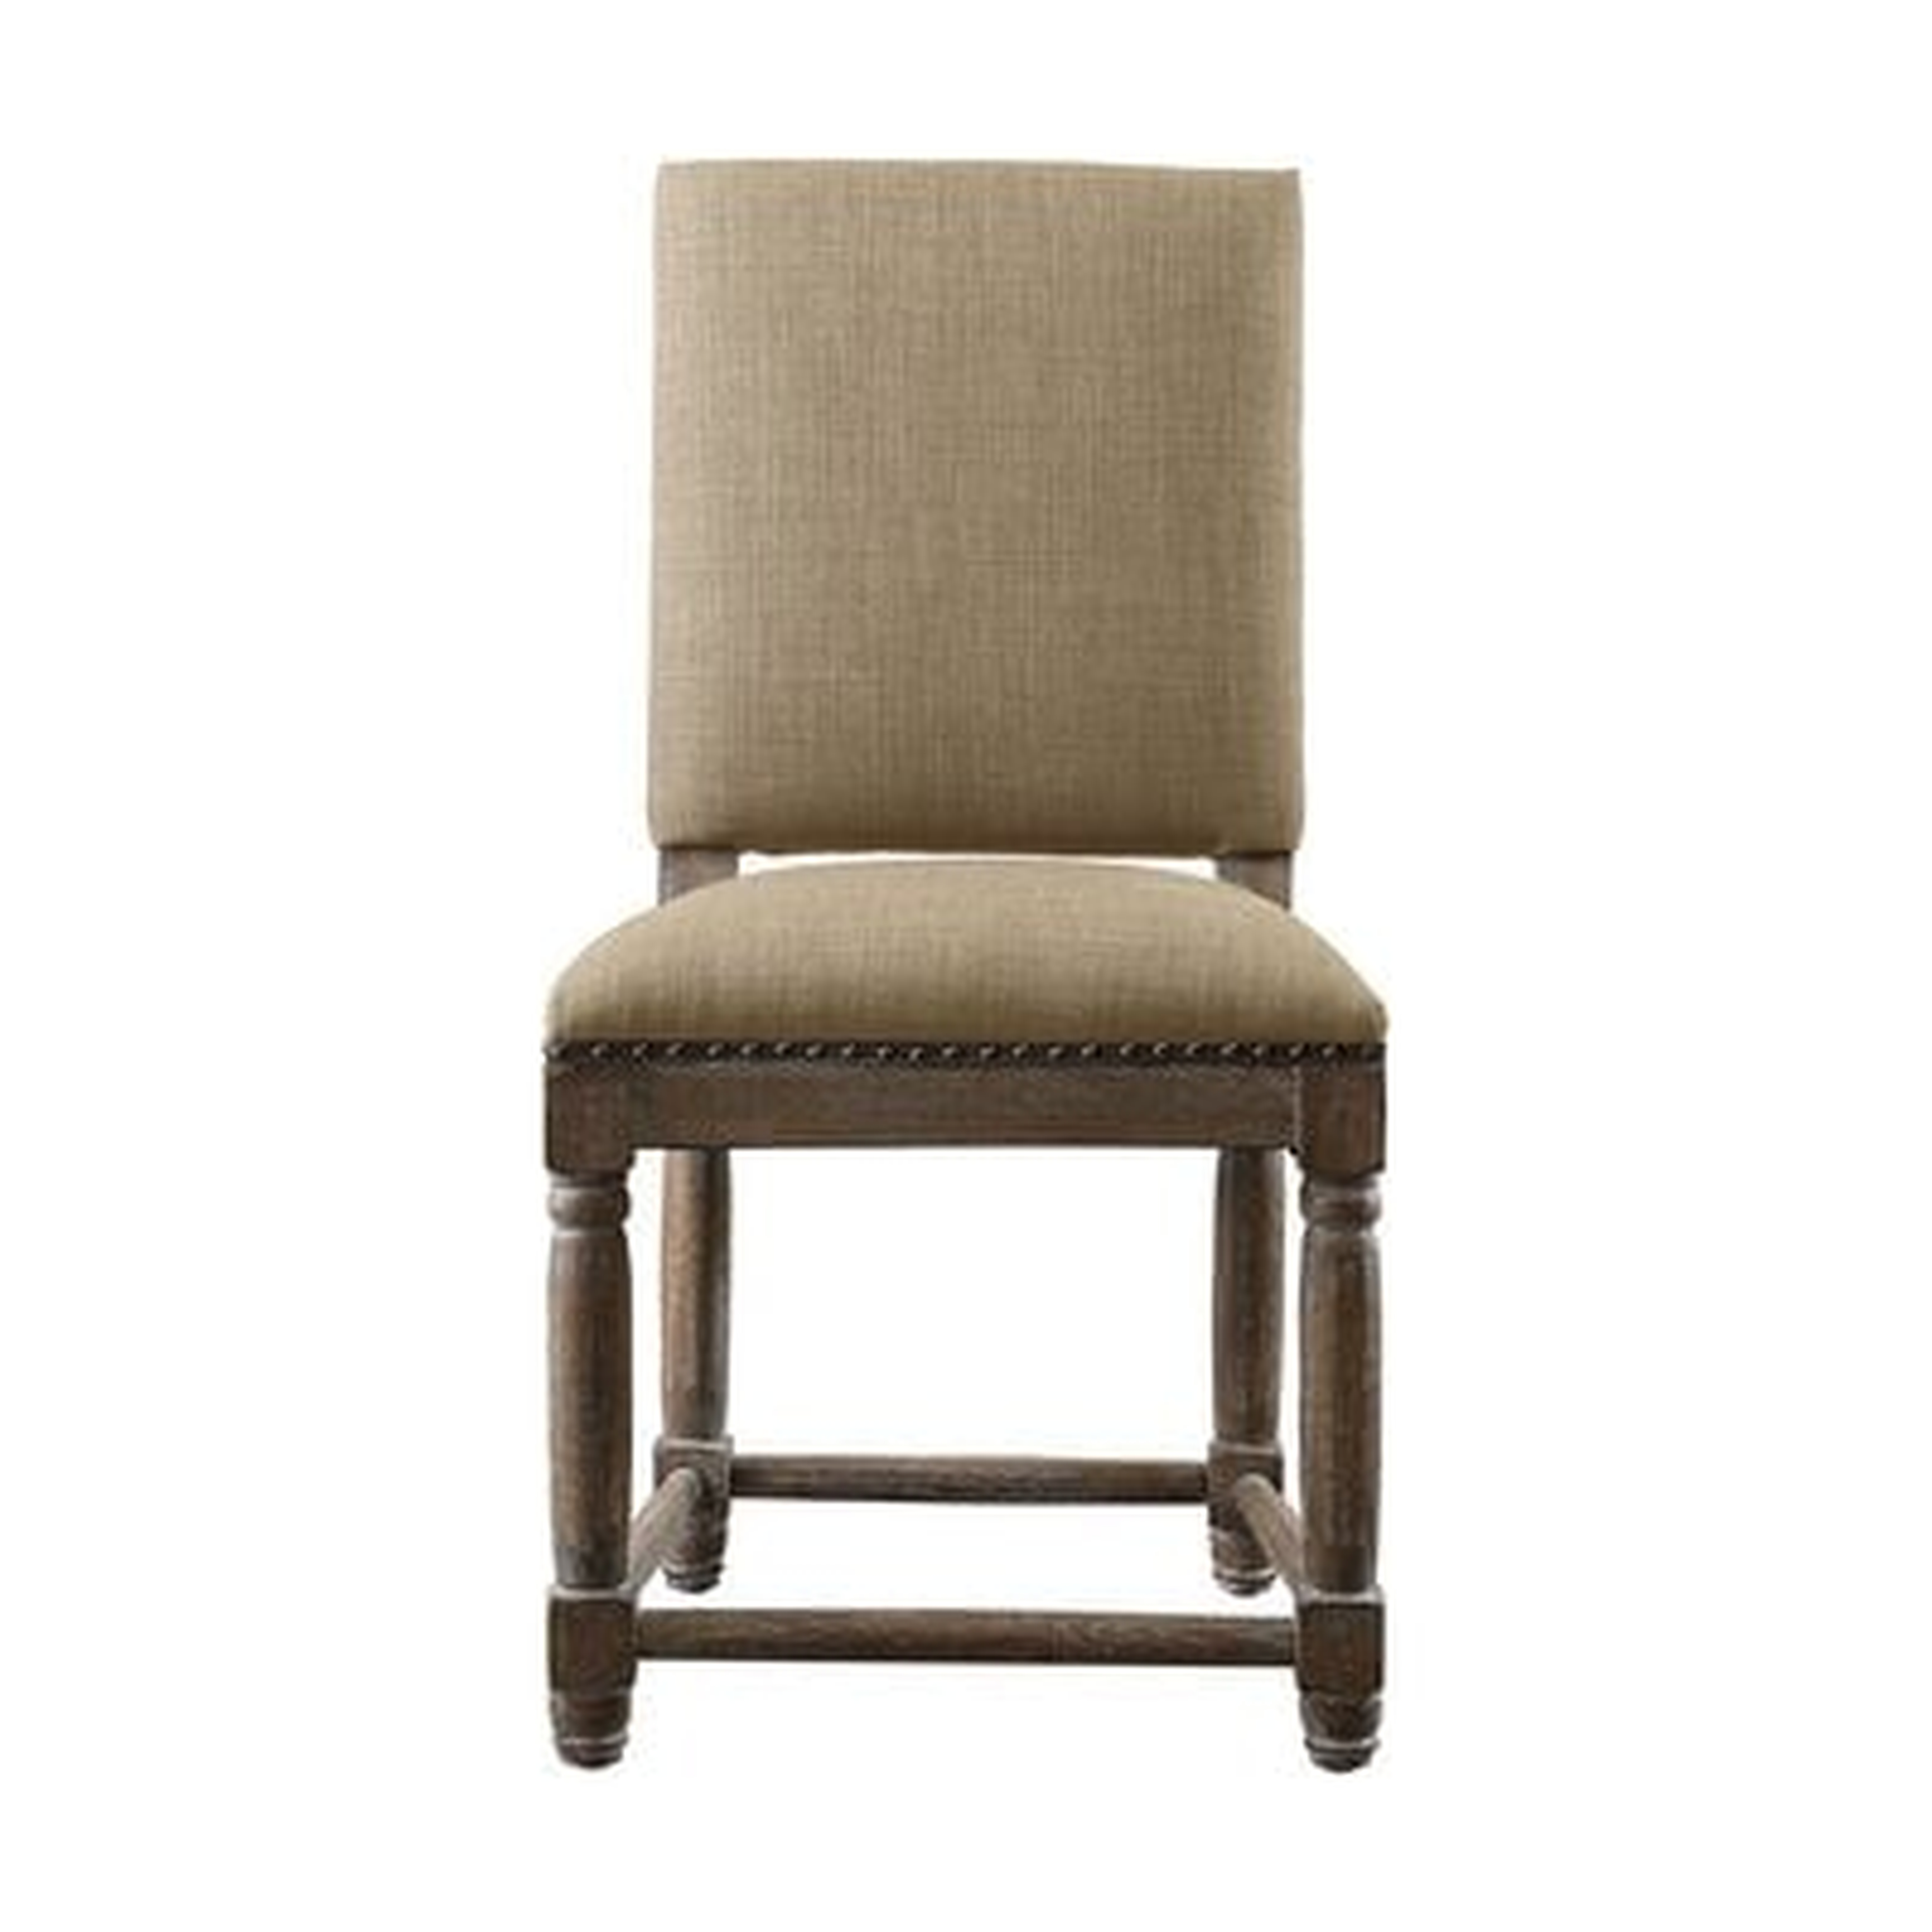 Latricia Upholstered Dining Chair (Set of 2) / Sand - Birch Lane